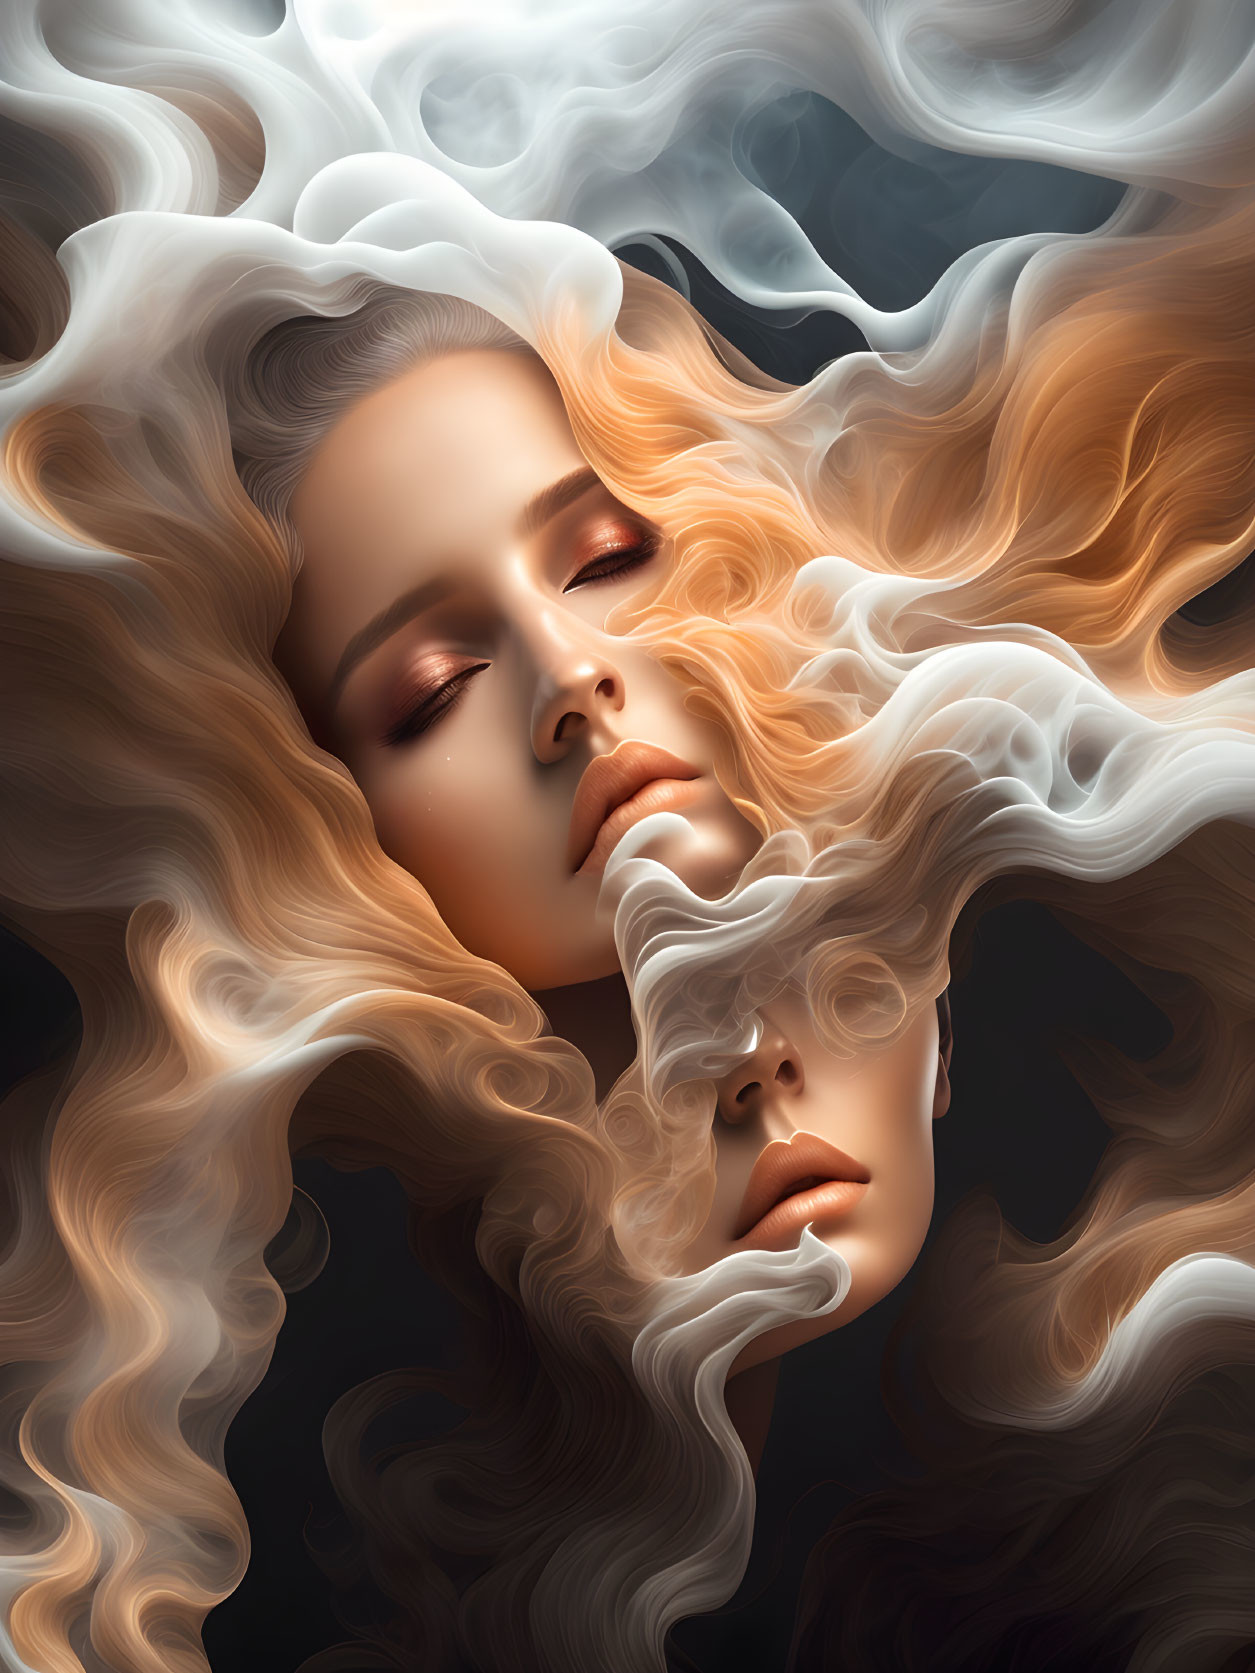 Digital Artwork: Two Women Blend Seamlessly with Flowing Hair